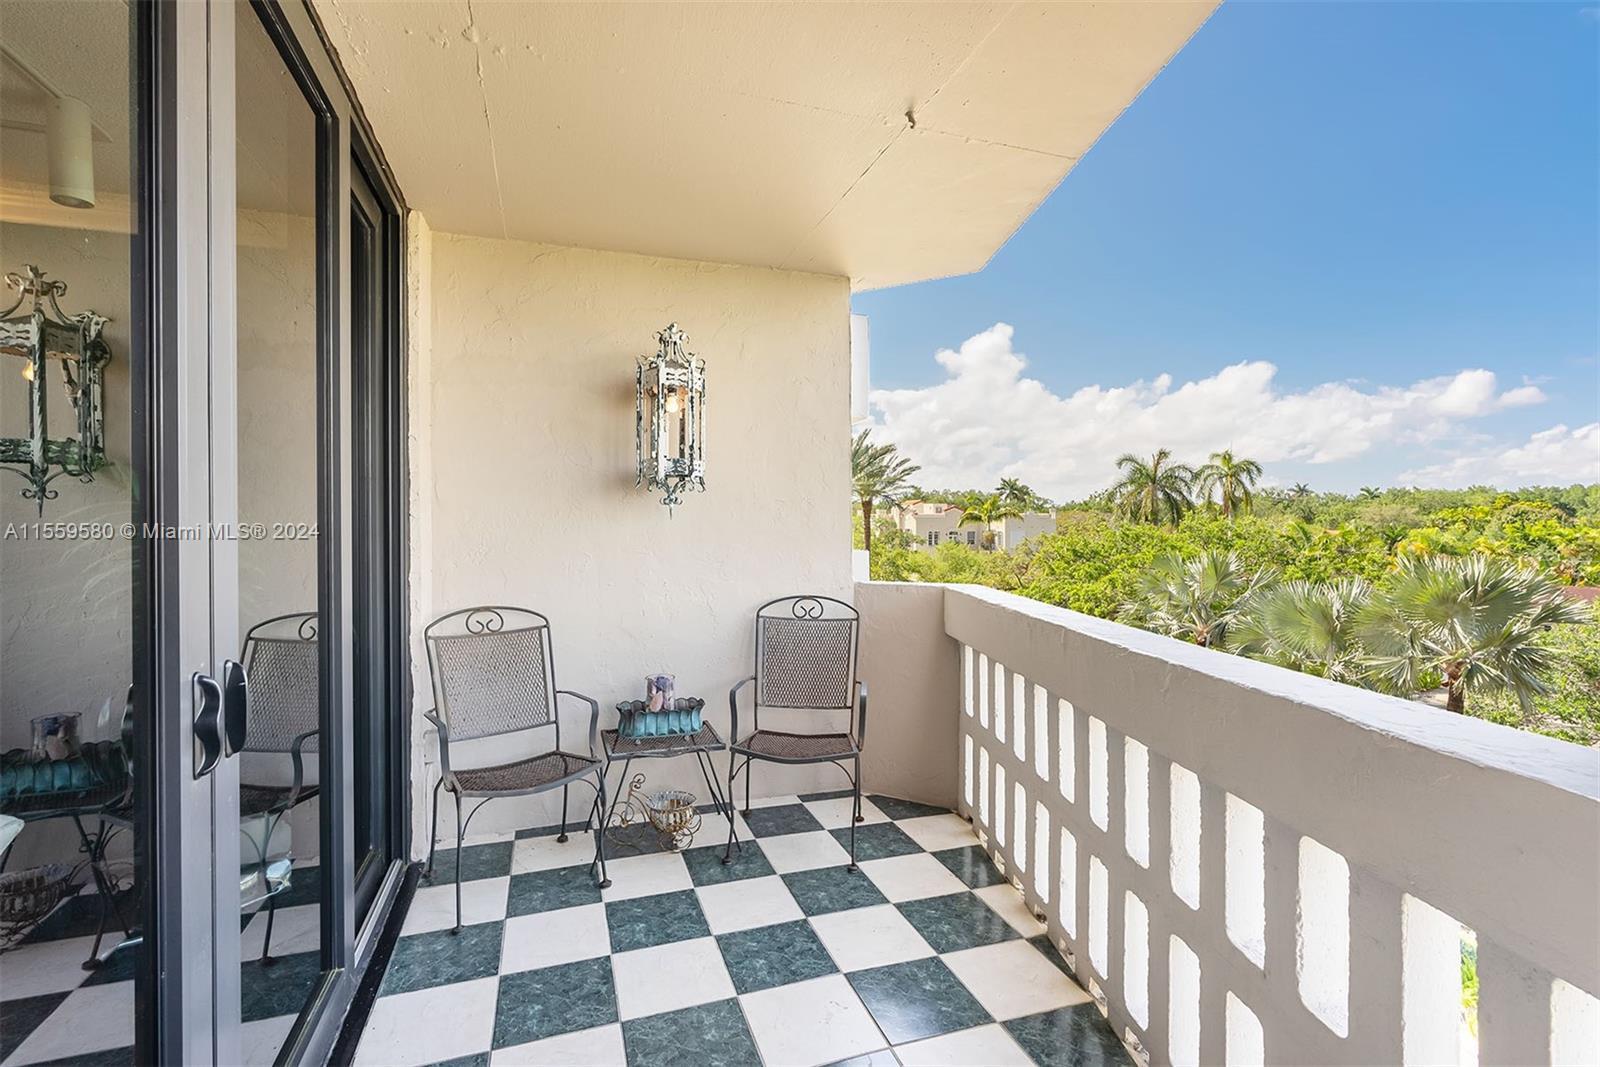 Photo of 90 Edgewater Dr #404 in Coral Gables, FL